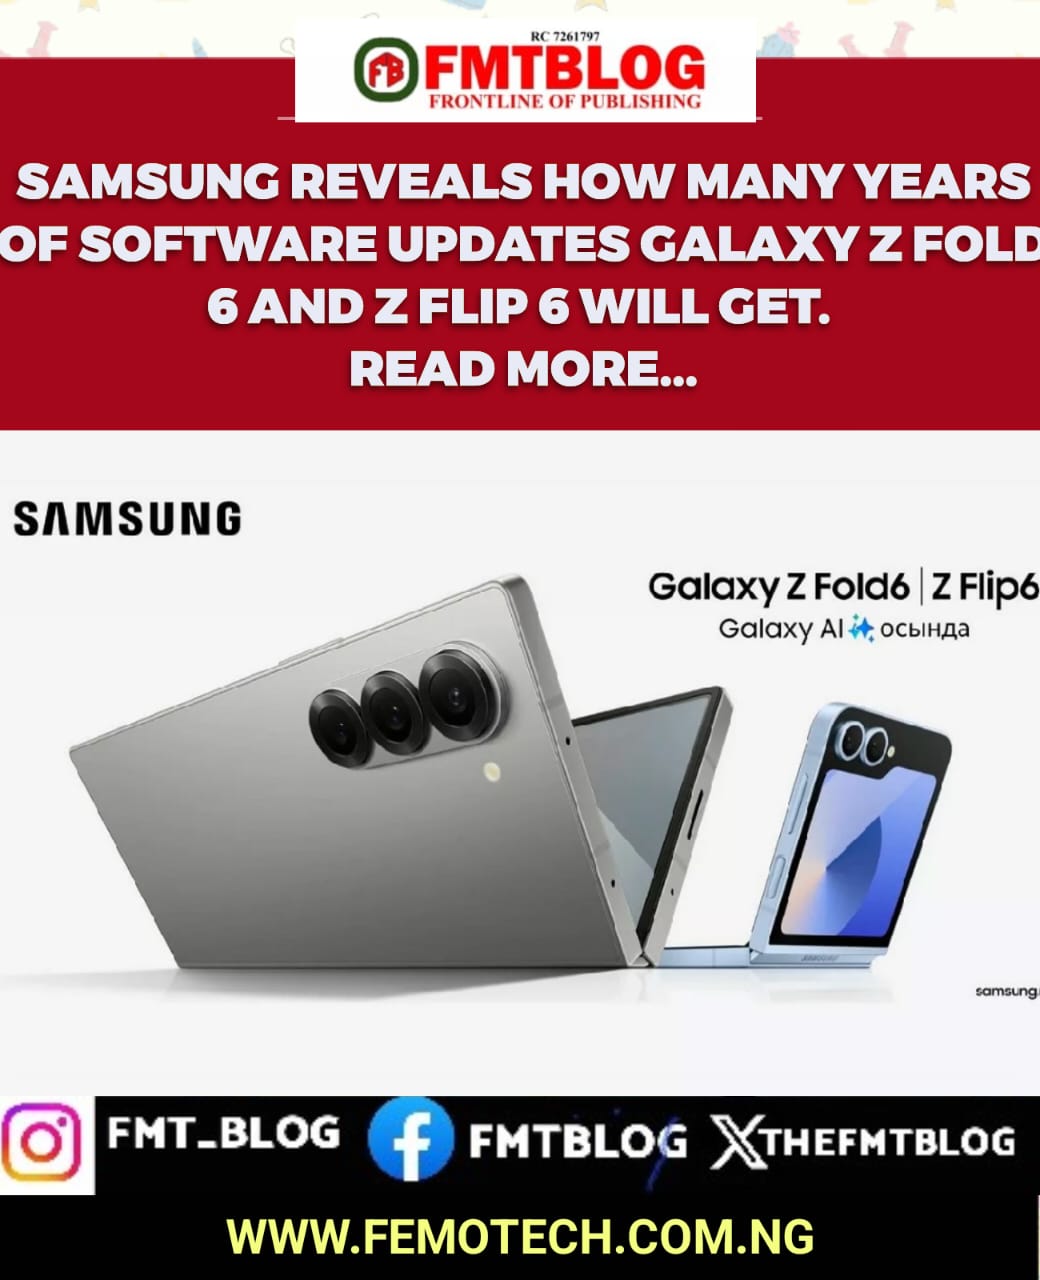 Samsung Reveals How Many Years Of Software Updates Galaxy Z Fold 6 and Z Flip 6 Will Get